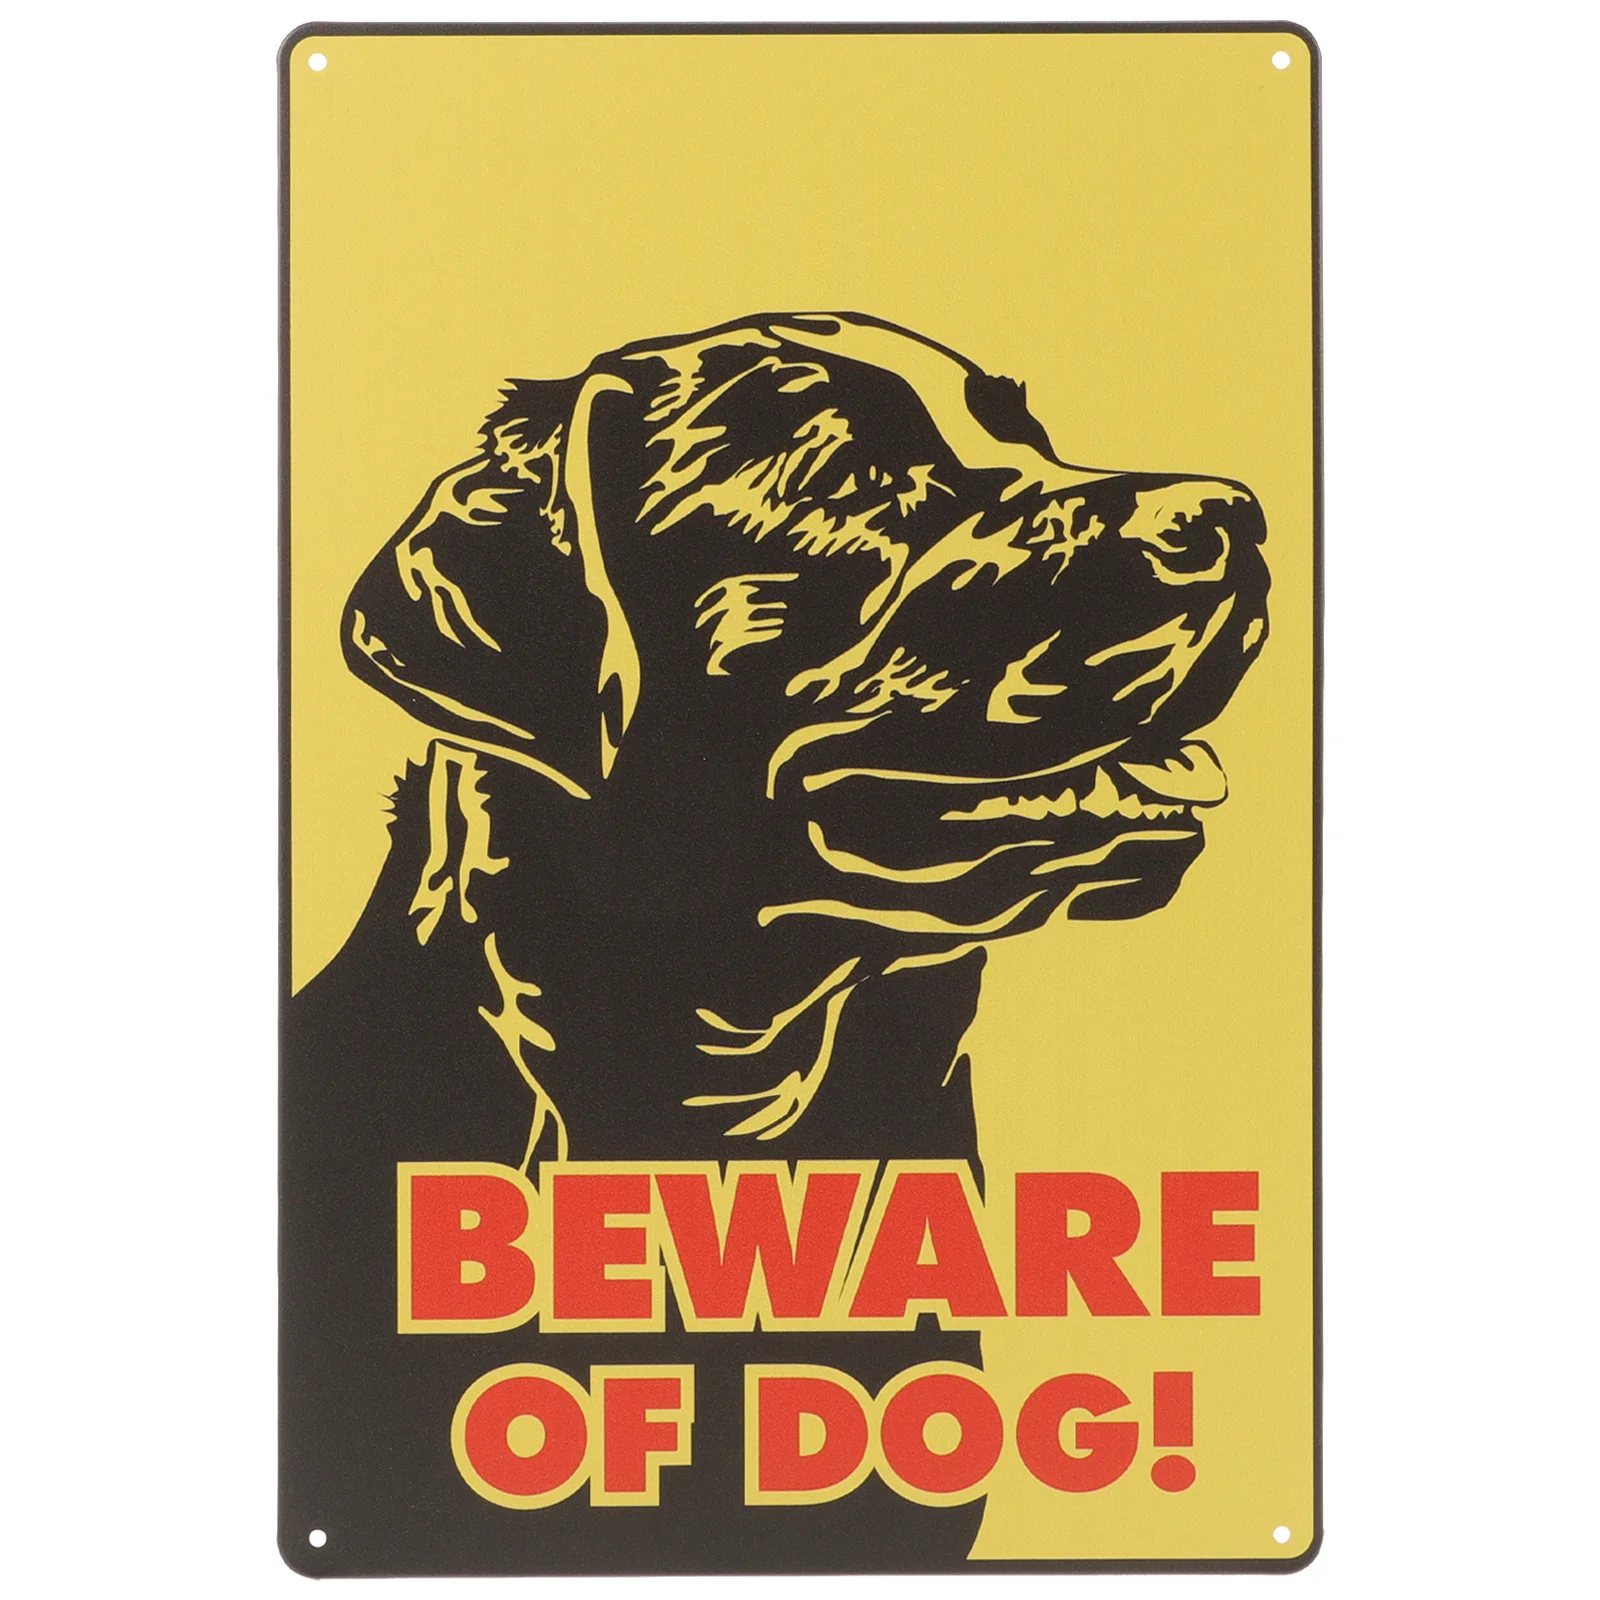 

Beware of Dog Warning Sign Caution Signs For Fence Decorative Painting/hanging Picture Home Iron Gate